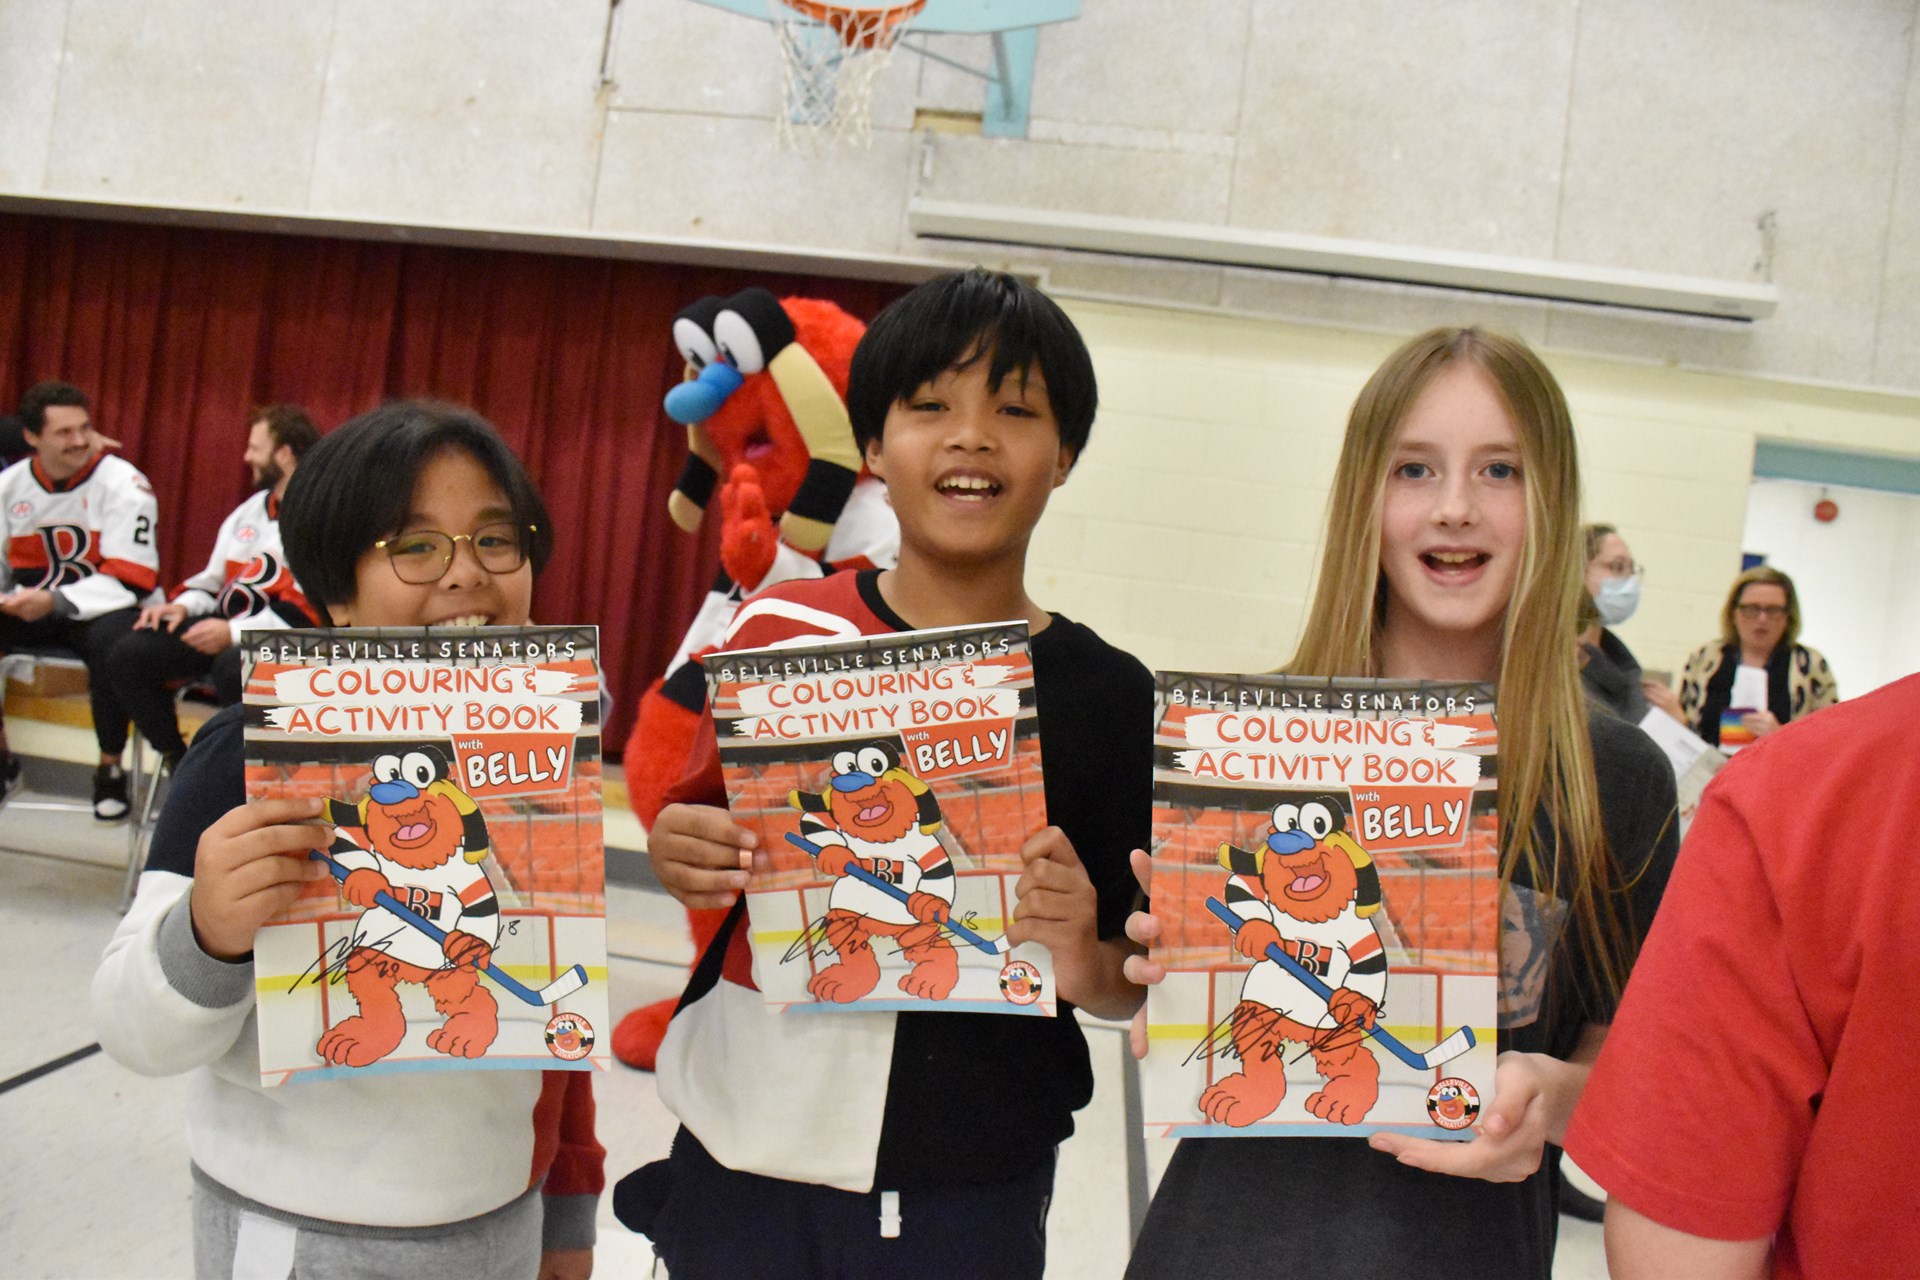 Students holding activity books